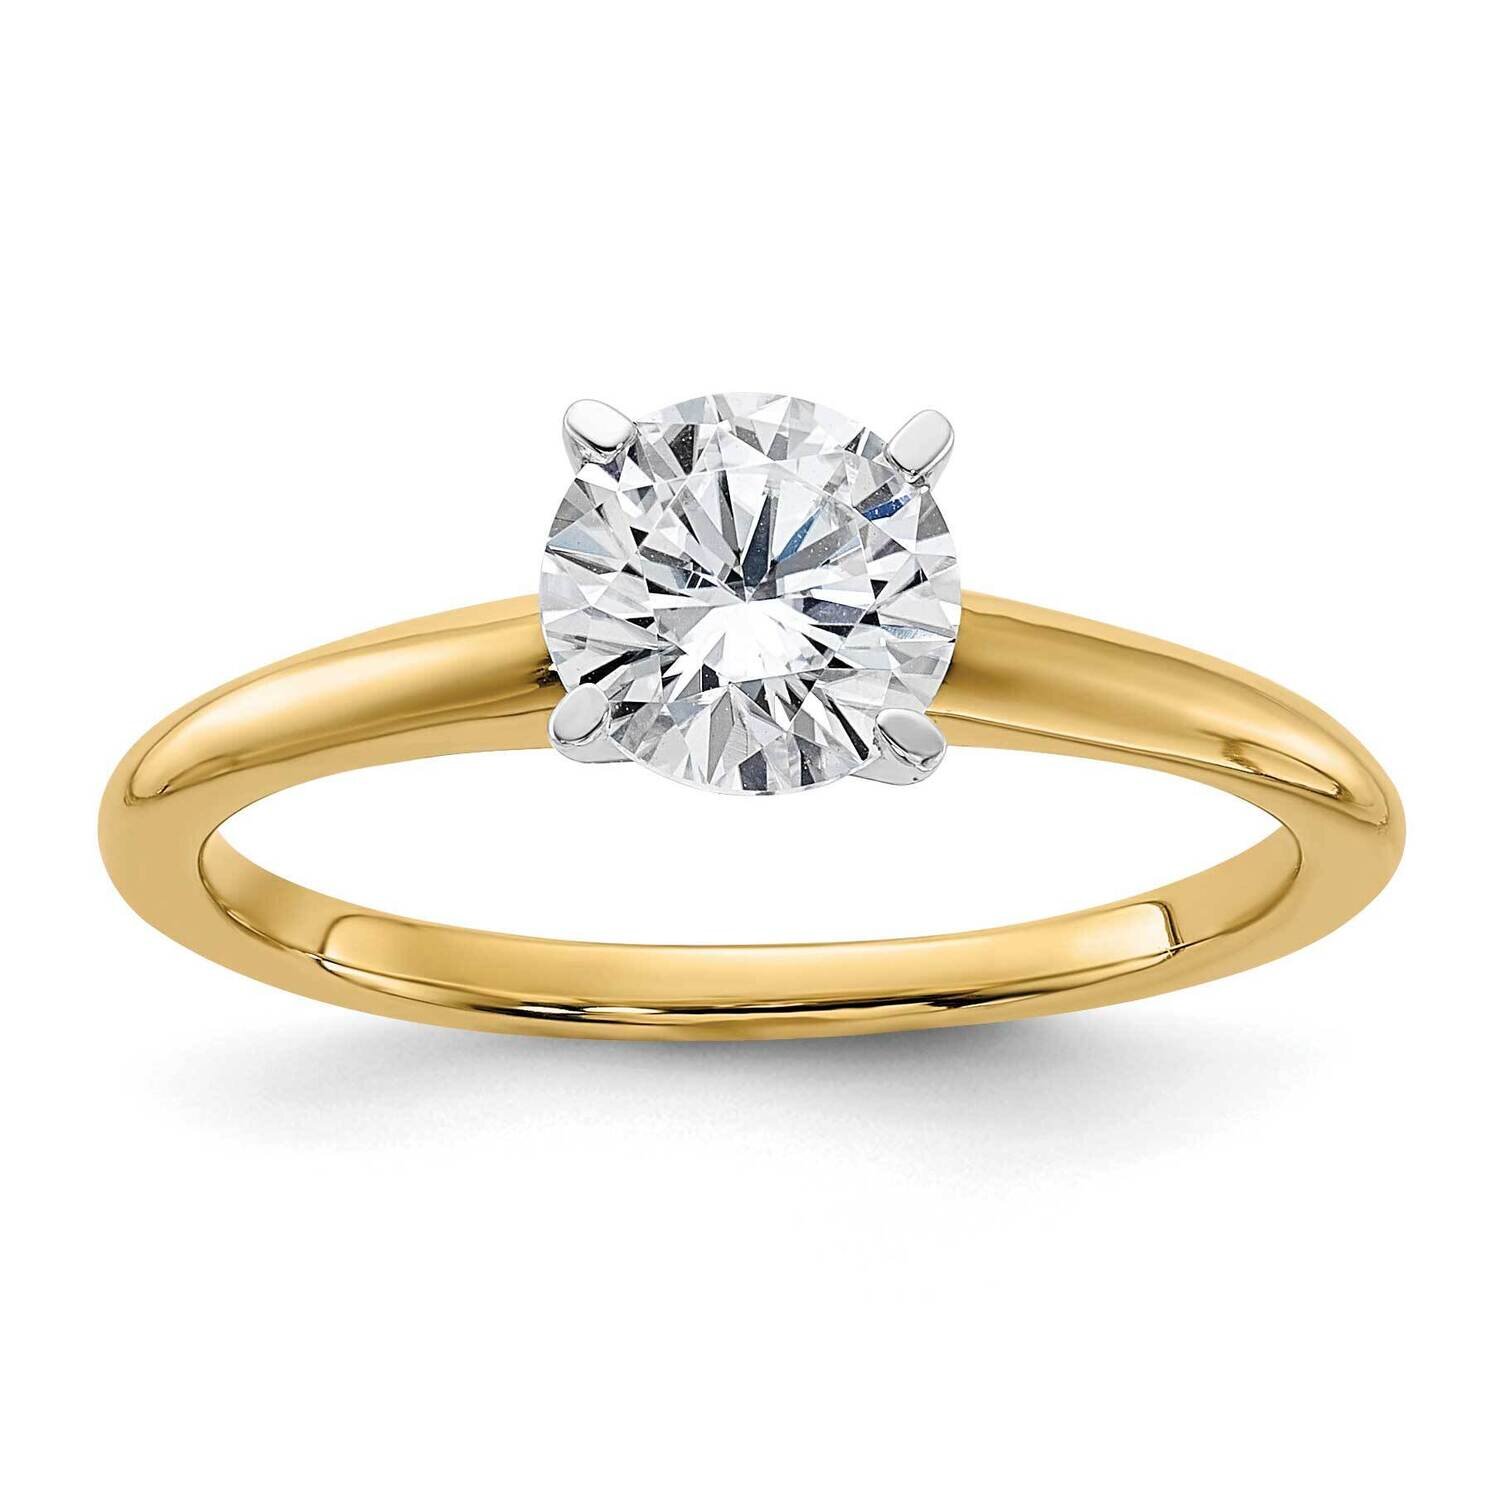 1ct. G H I True Light Round Moissanite Solitaire Ring 14k Two Tone Gold RM5965R-100-7MT